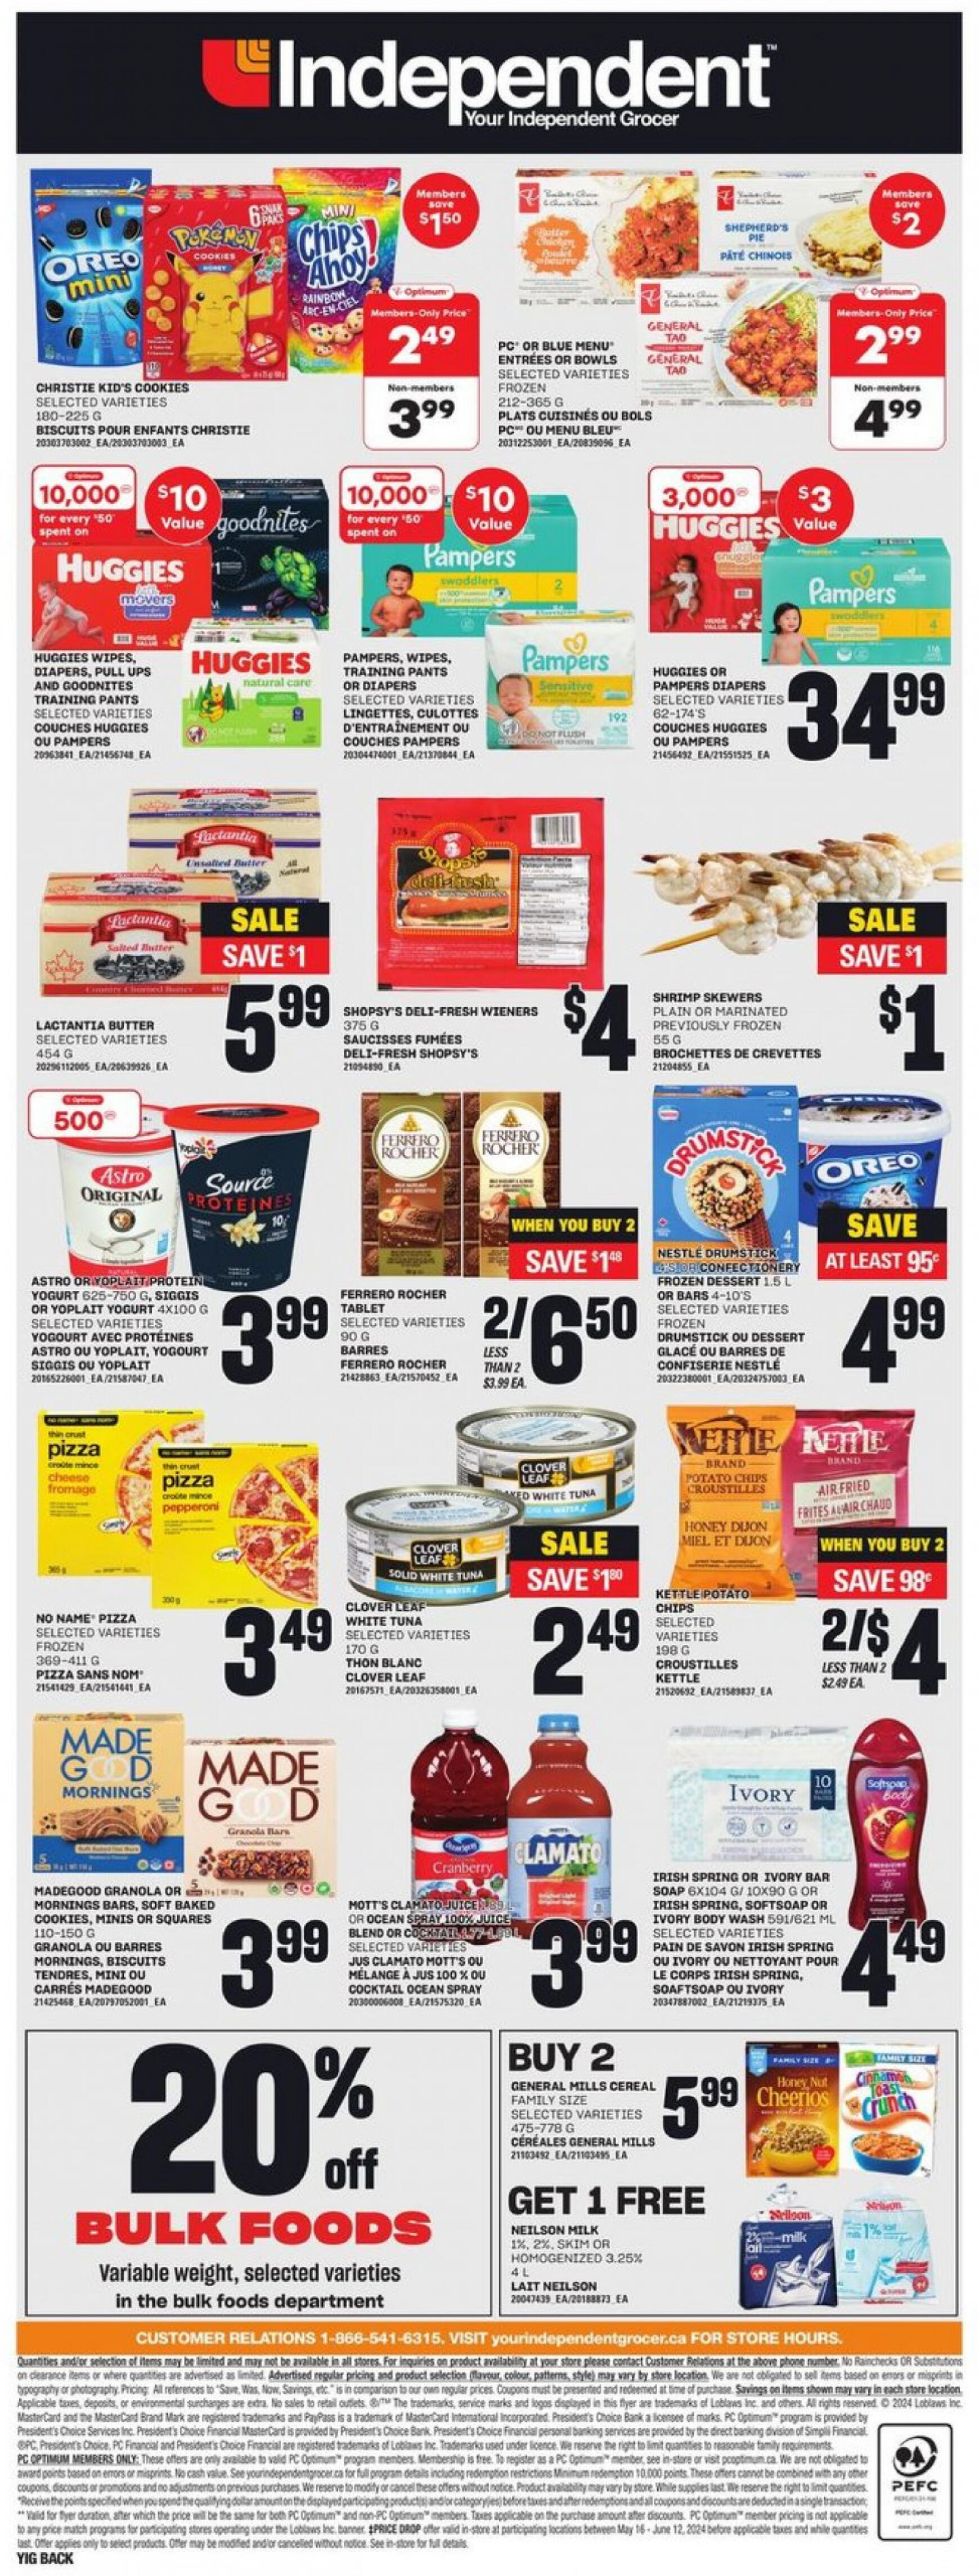 independent-grocery - Independent Grocery flyer current 01.05. - 31.05. - page: 6